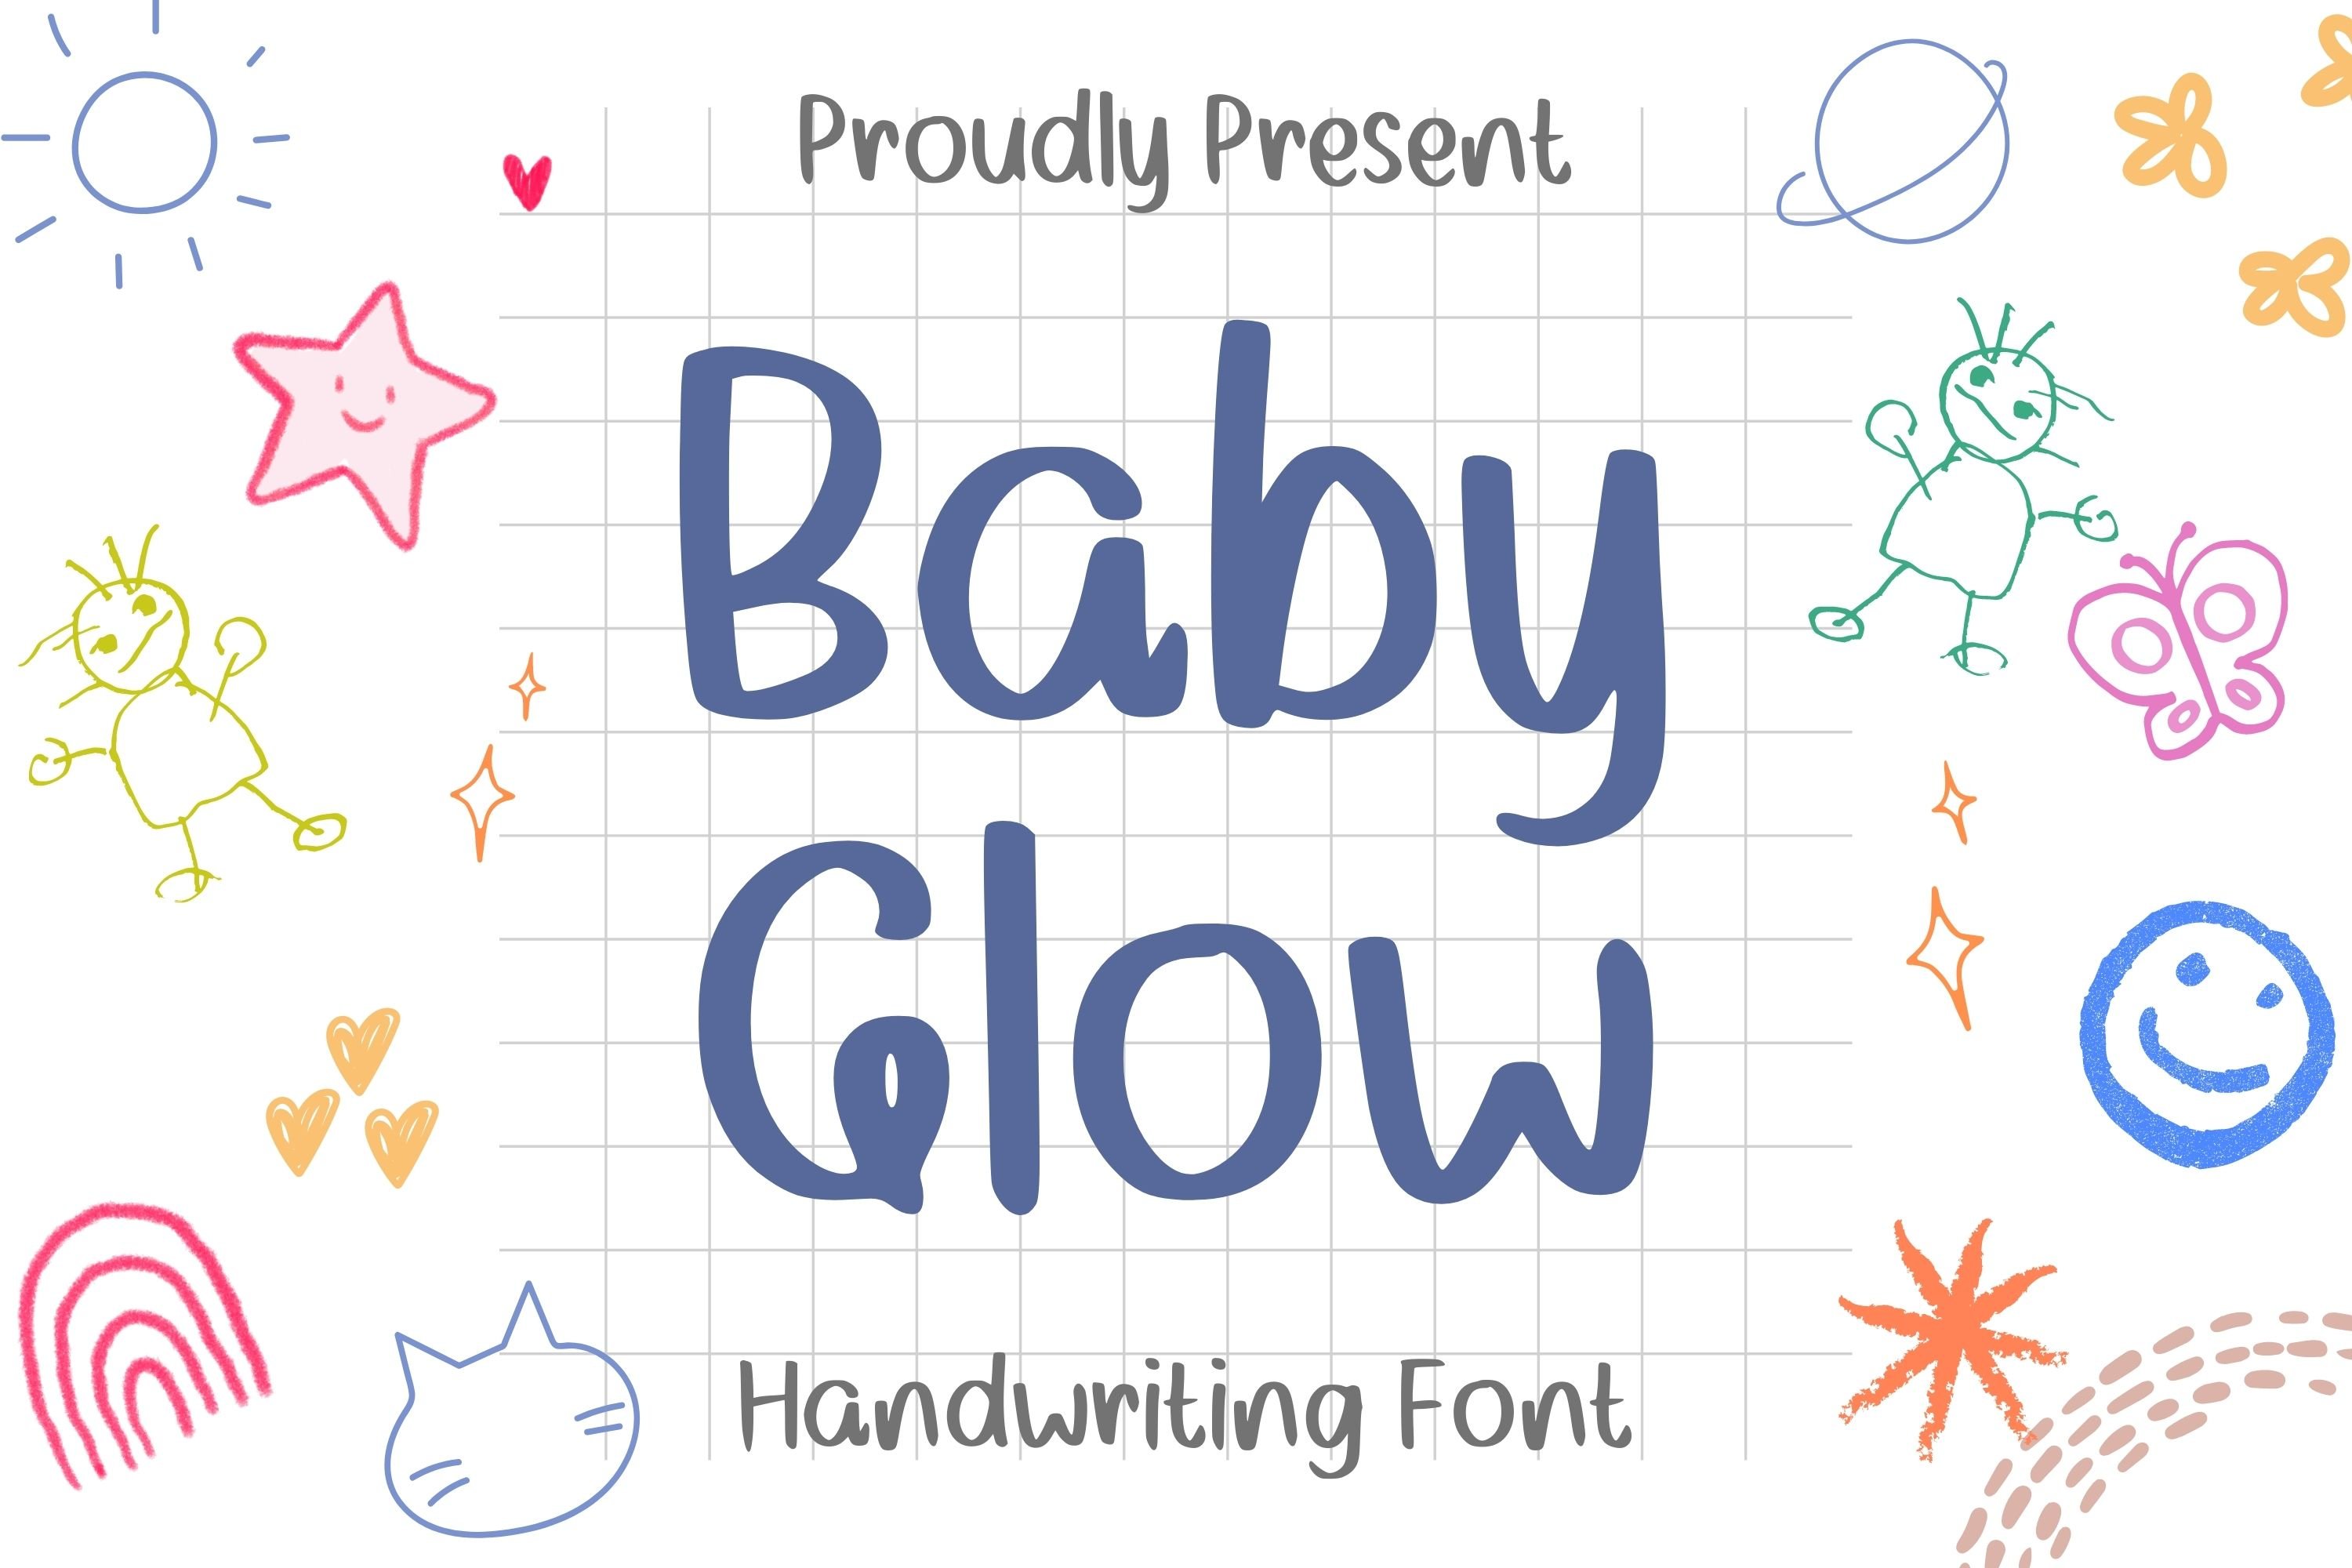 Baby Glow Font cover image.